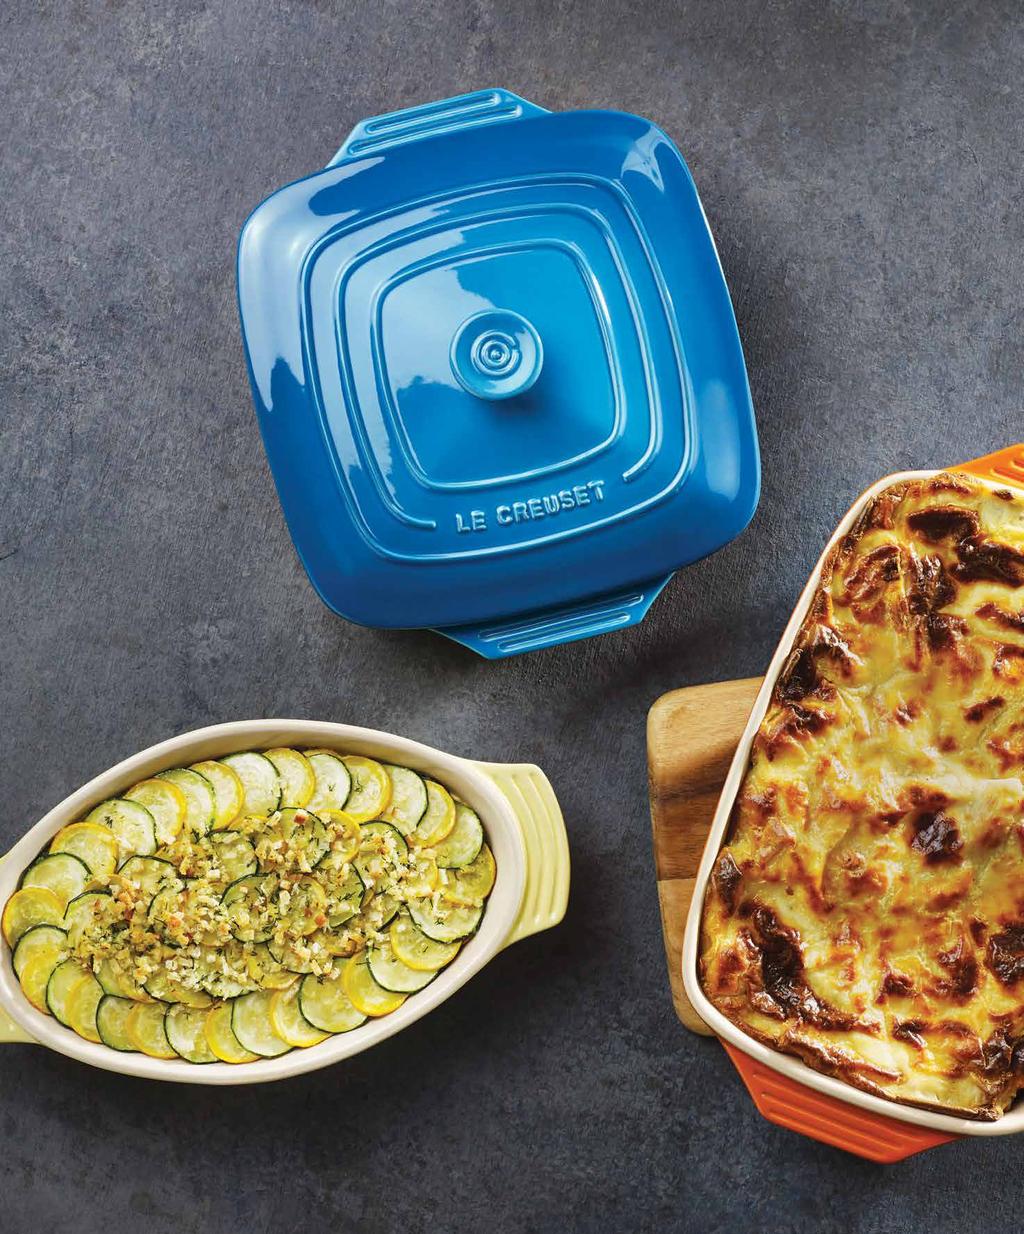 LE CREUSET STOARE IS LOVELY whether baking, roasting or serving at